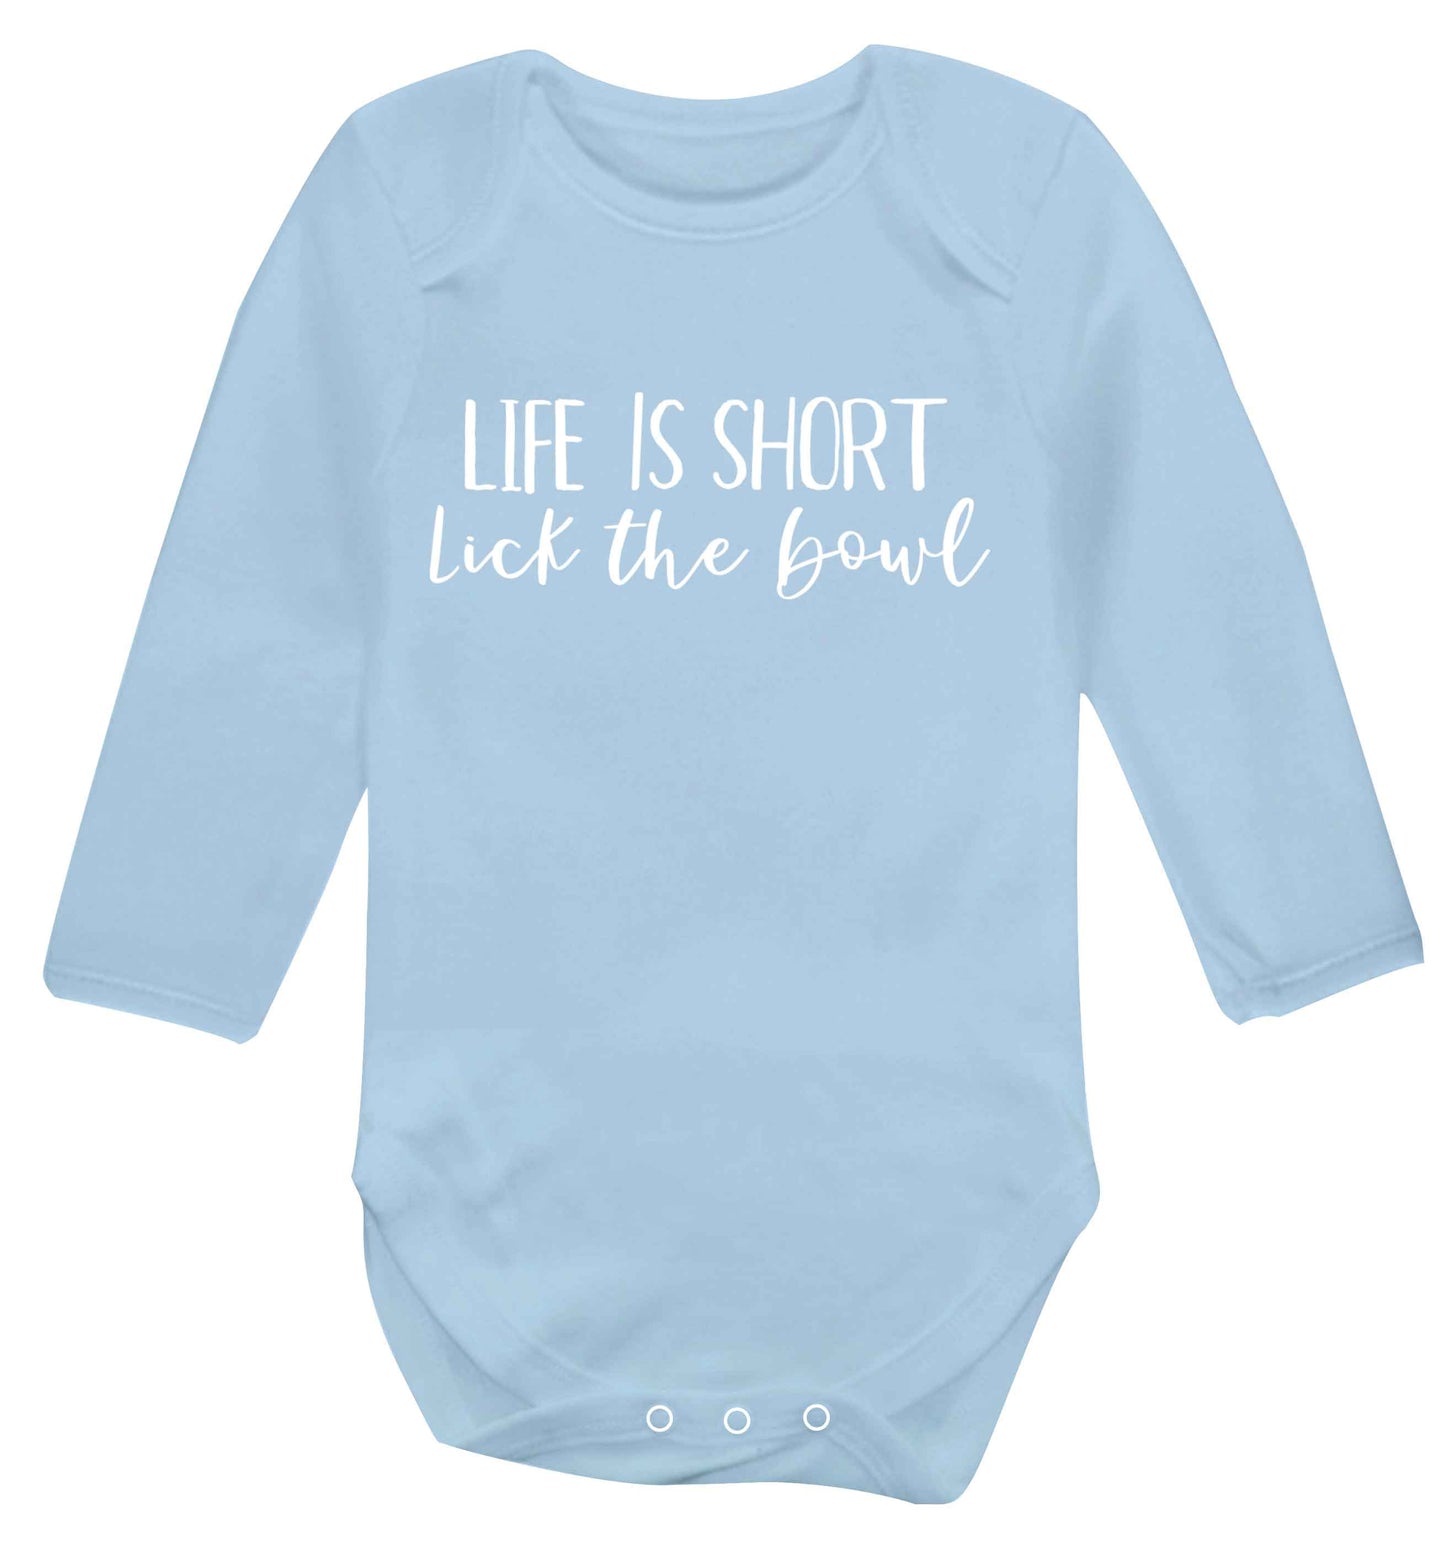 Life is short lick the bowl Baby Vest long sleeved pale blue 6-12 months